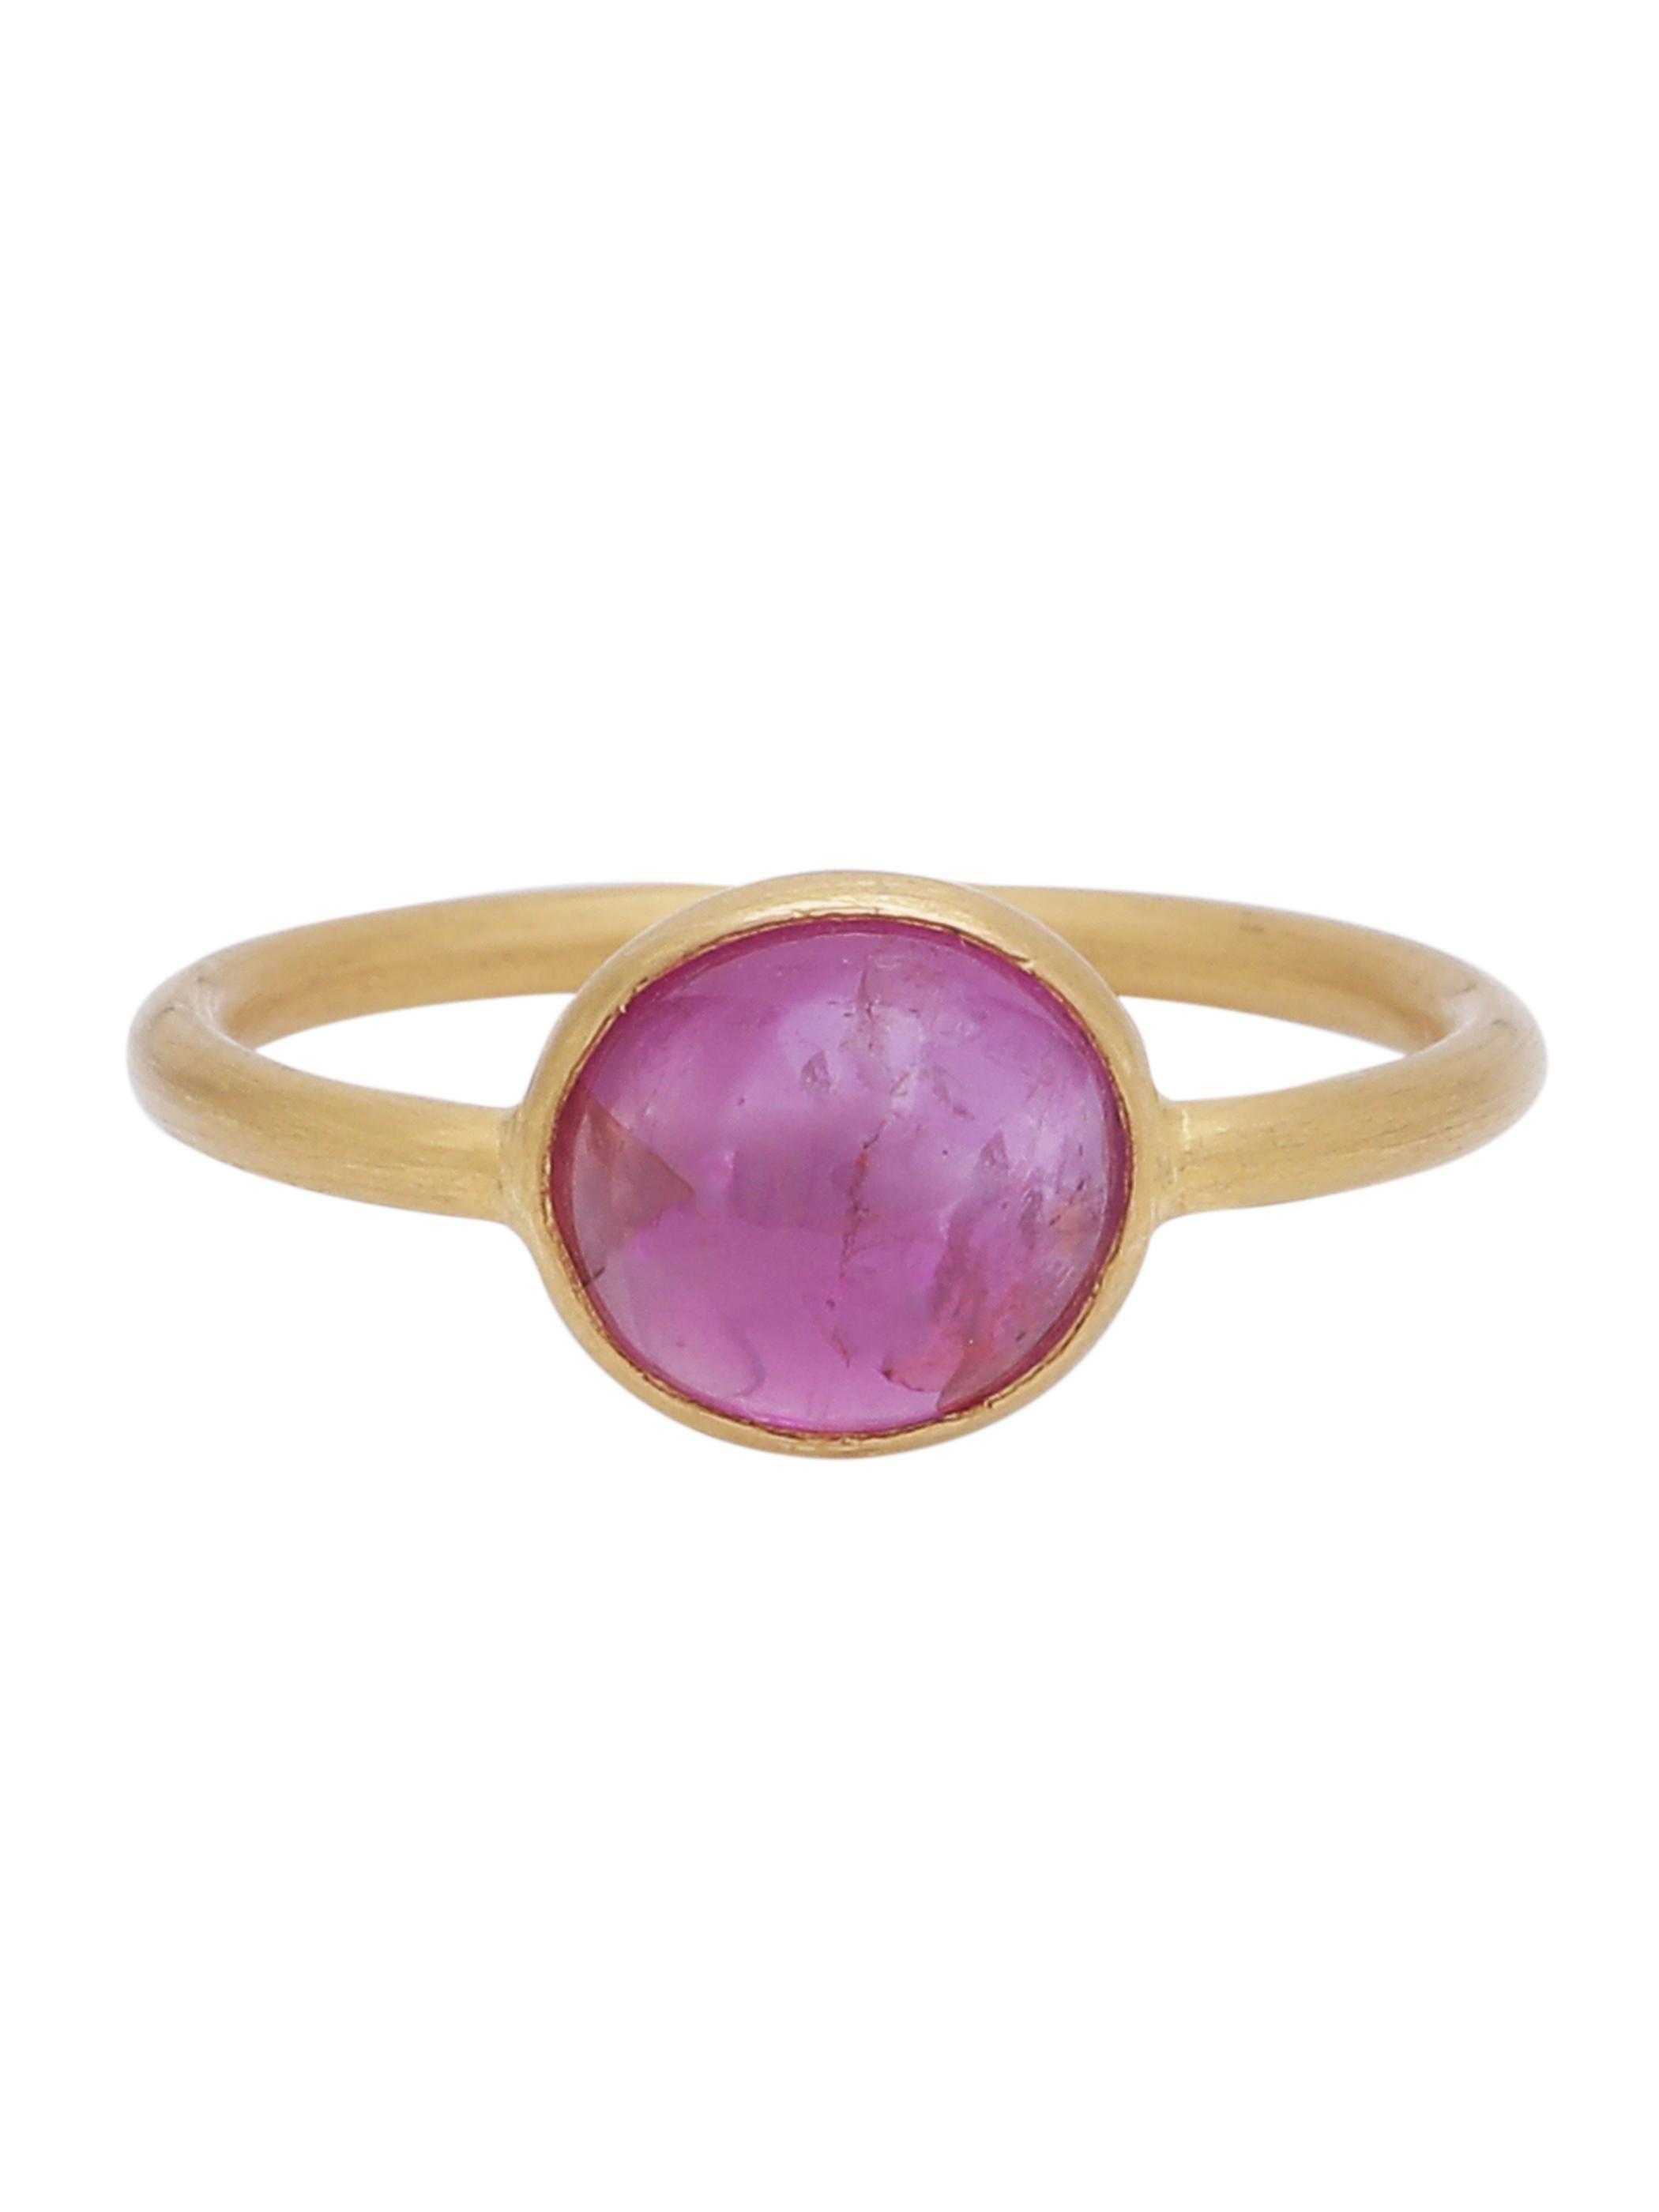 A Natural pink Ruby Cabochon delicately set in 22K matte finish yellow gold. The whole ring is Handcrafted by our skilled artisans.
Its a simple and delicate ring that can be worn alone or be stacked with other colours.
The Ruby in the ring weighs